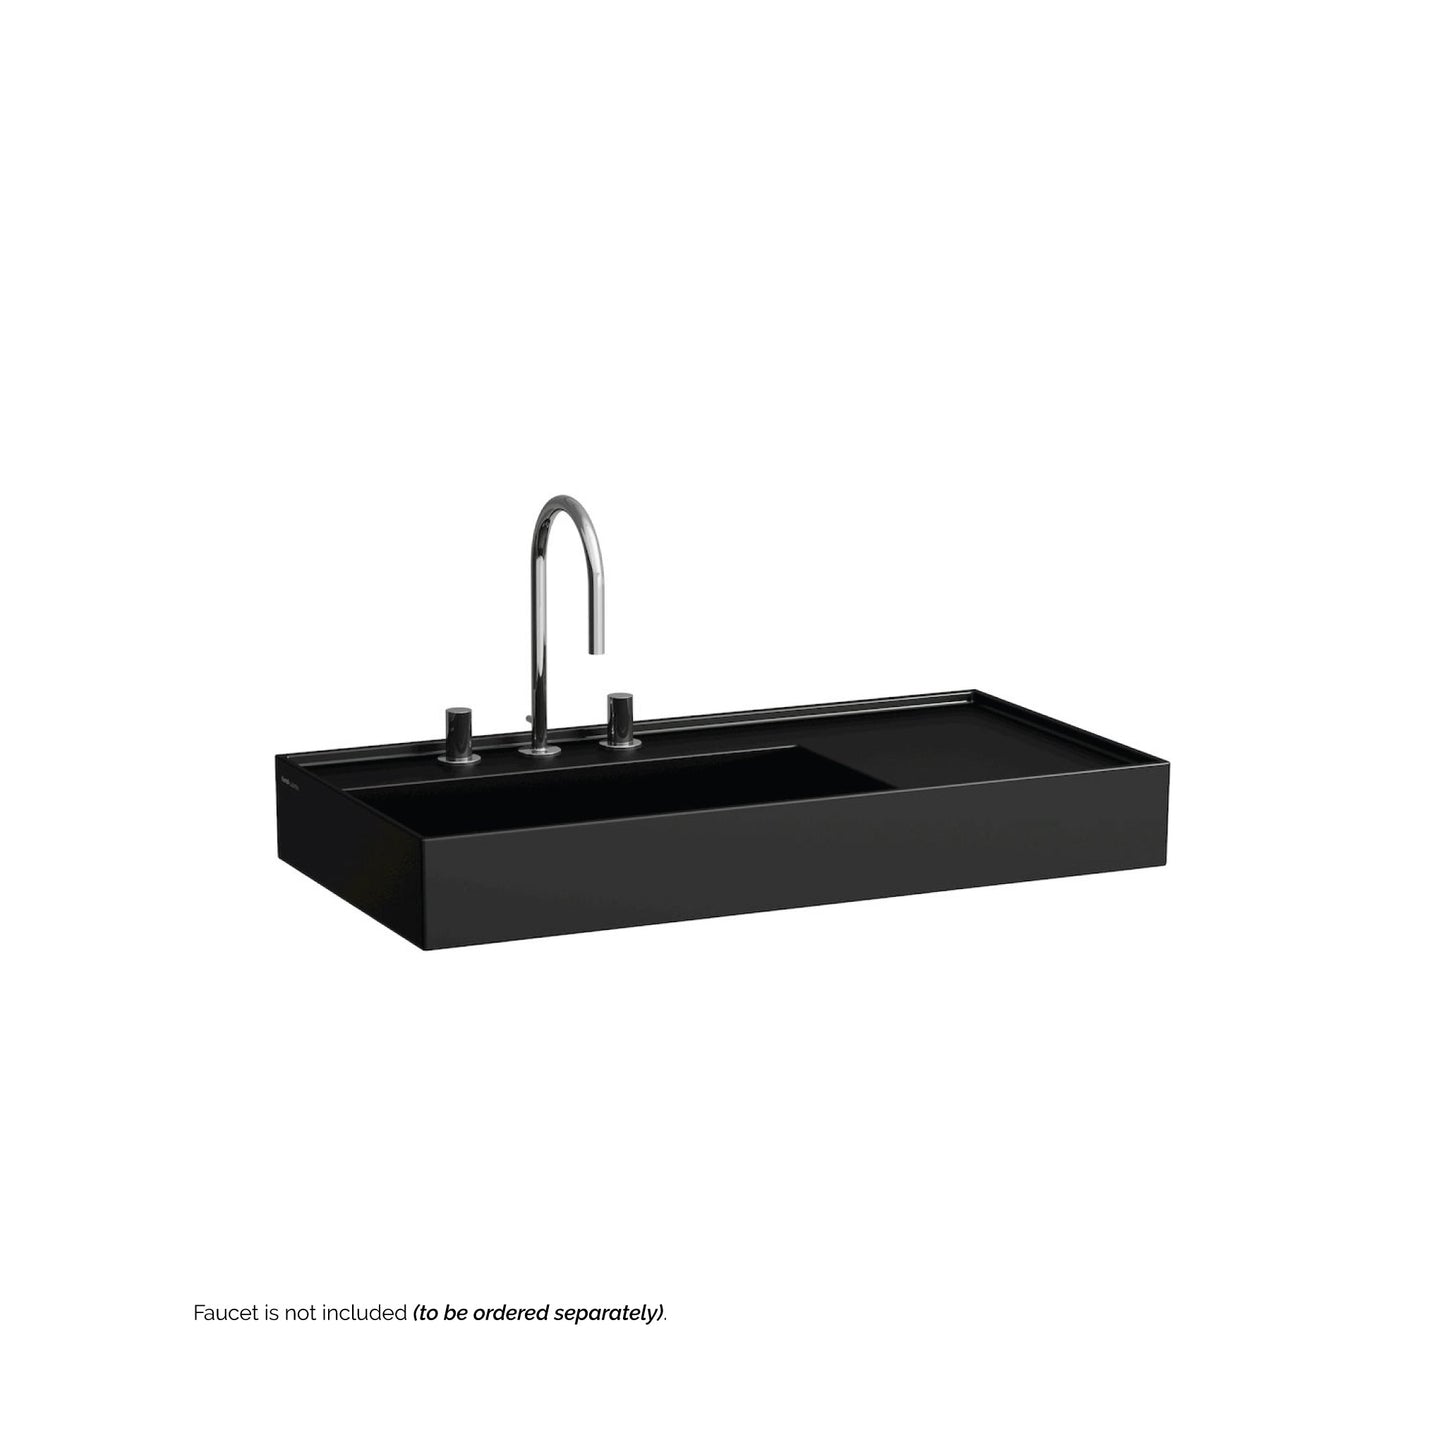 Laufen Kartell 35" x 18" Glossy Black Wall-Mounted Shelf-Right Bathroom Sink With 3 Faucet Holes